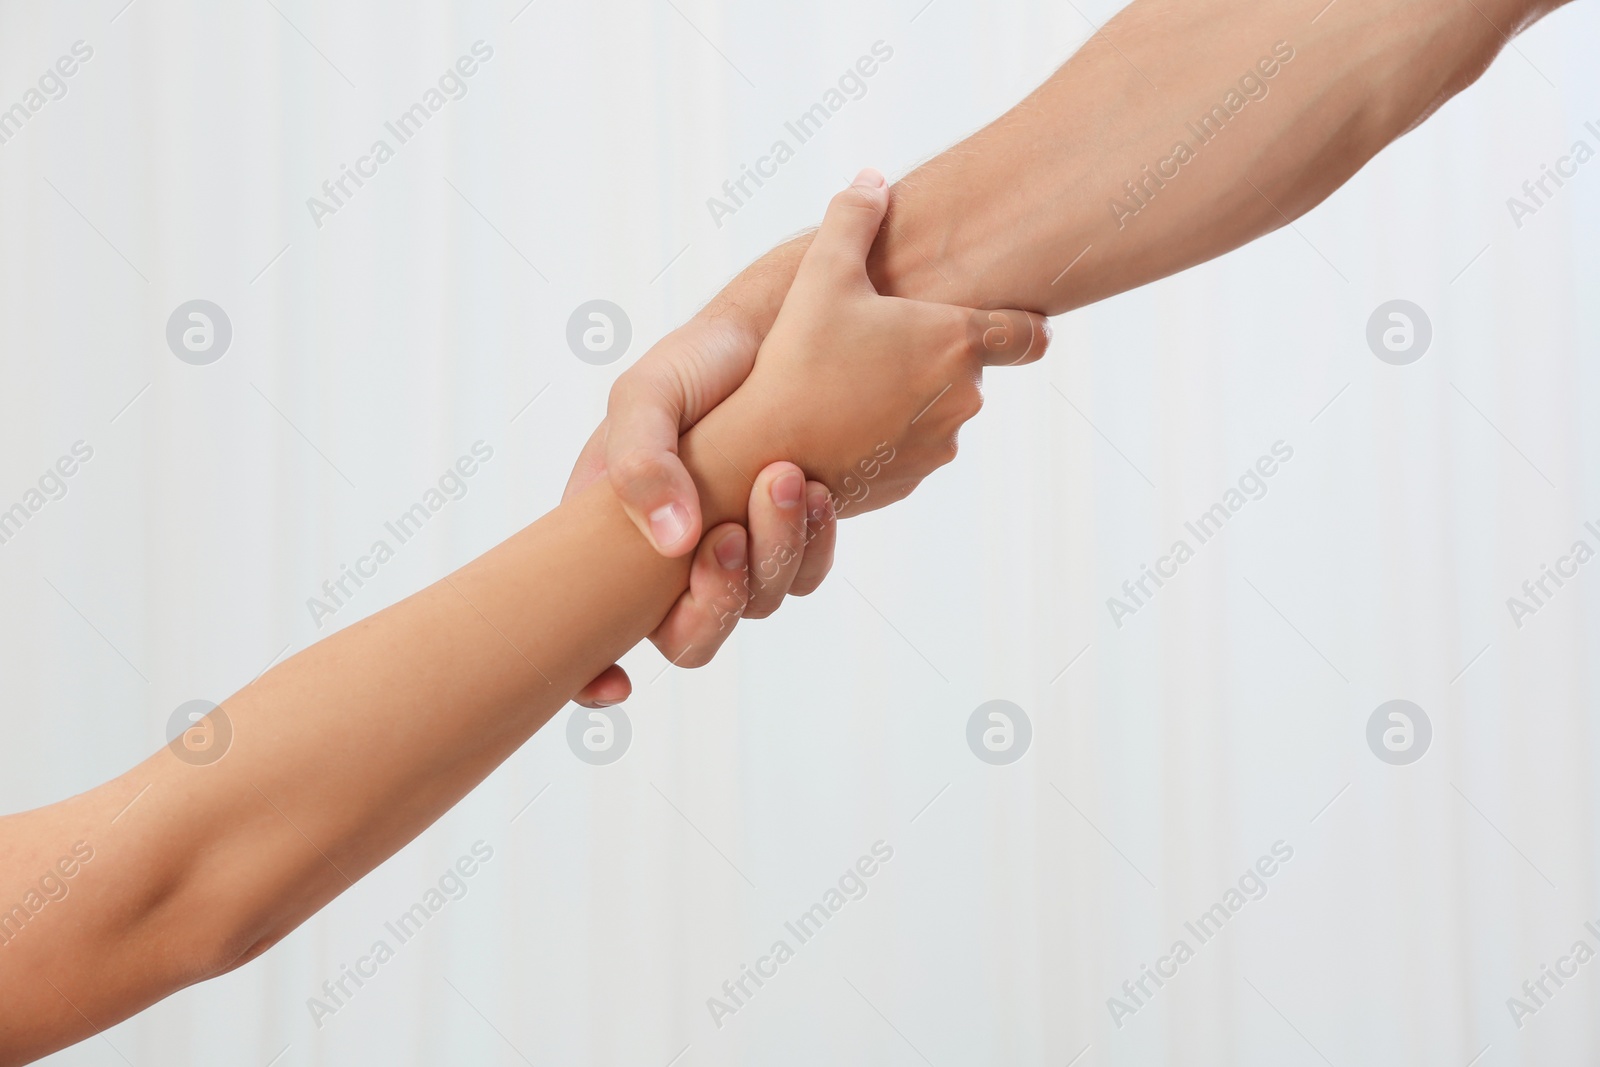 Photo of People holding hands together on light background. Concept of support and help